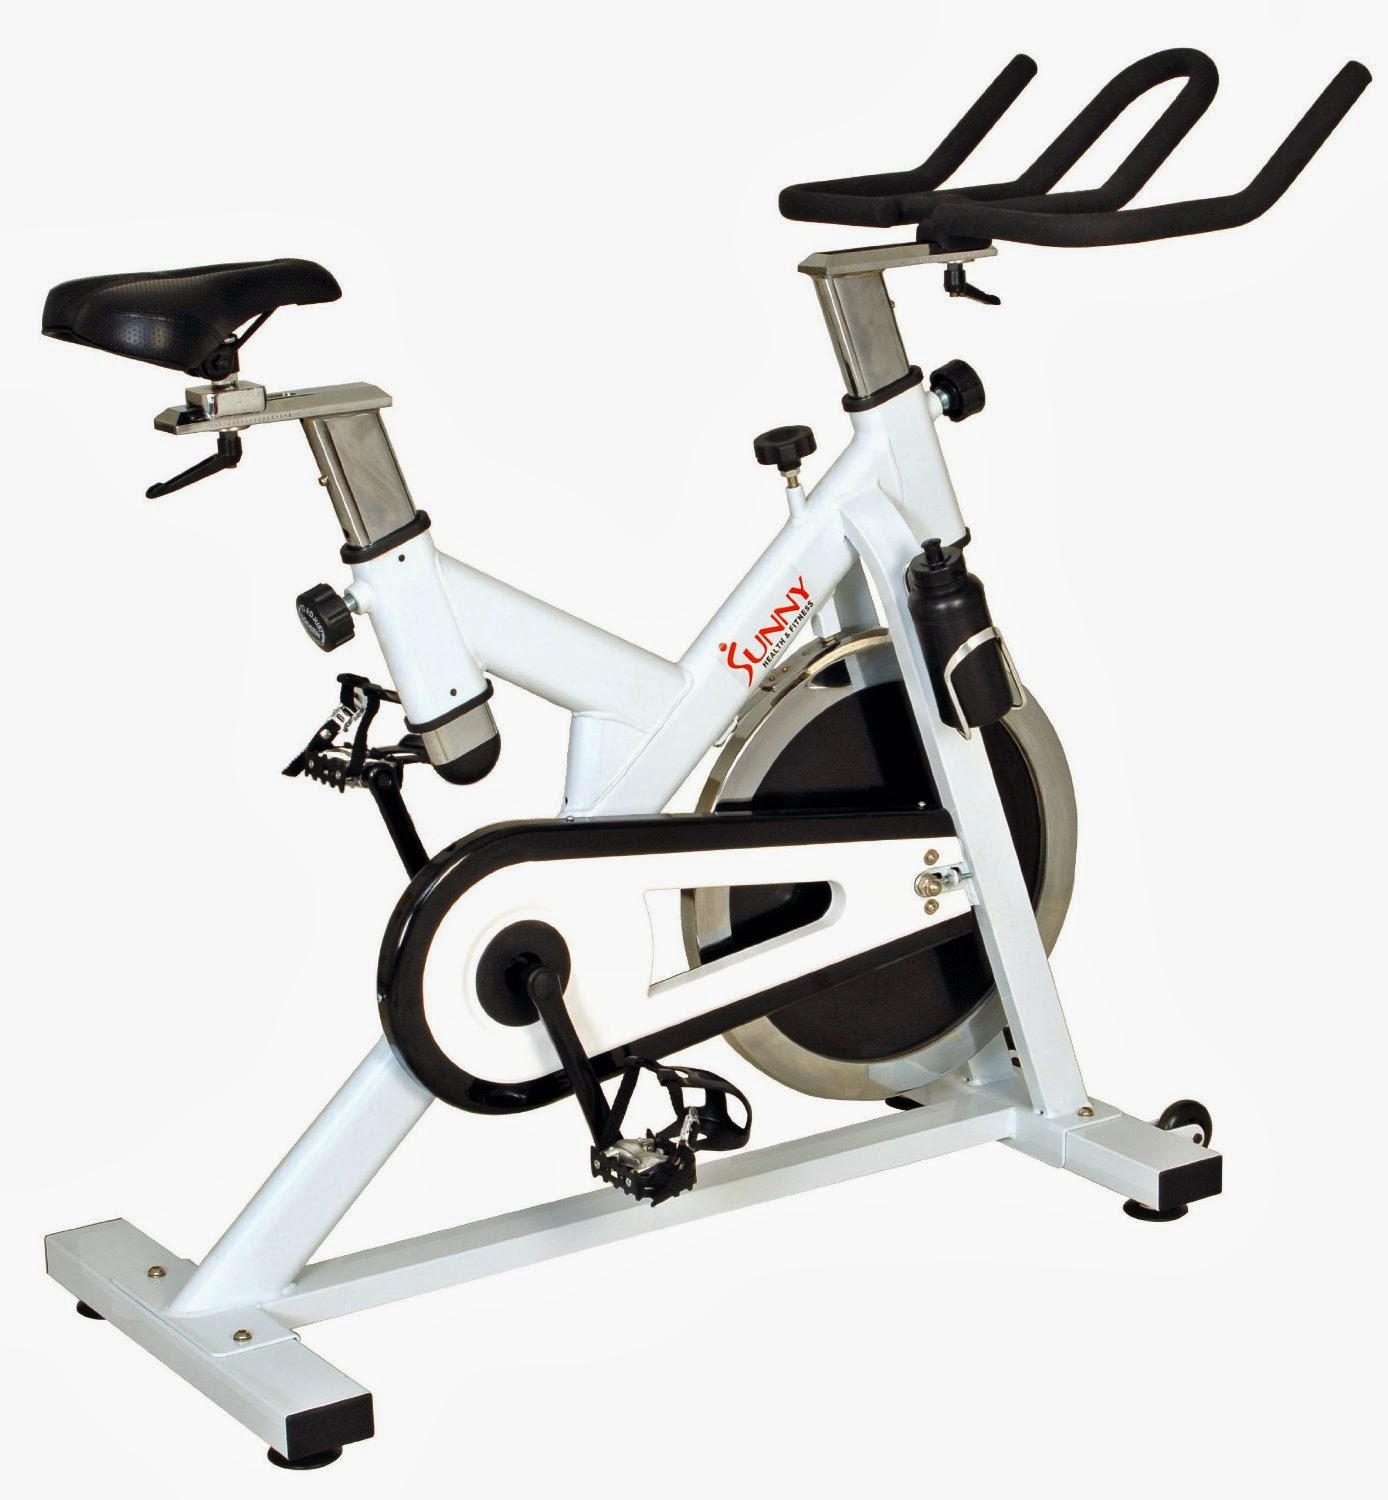 Sunny Health & Fitness Premier Indoor Cycling Bike SF-B1110, review and compare with SF-B1002, SF-B901, SF-B1001, top best Sunny indoor cycling bikes, spin bikes